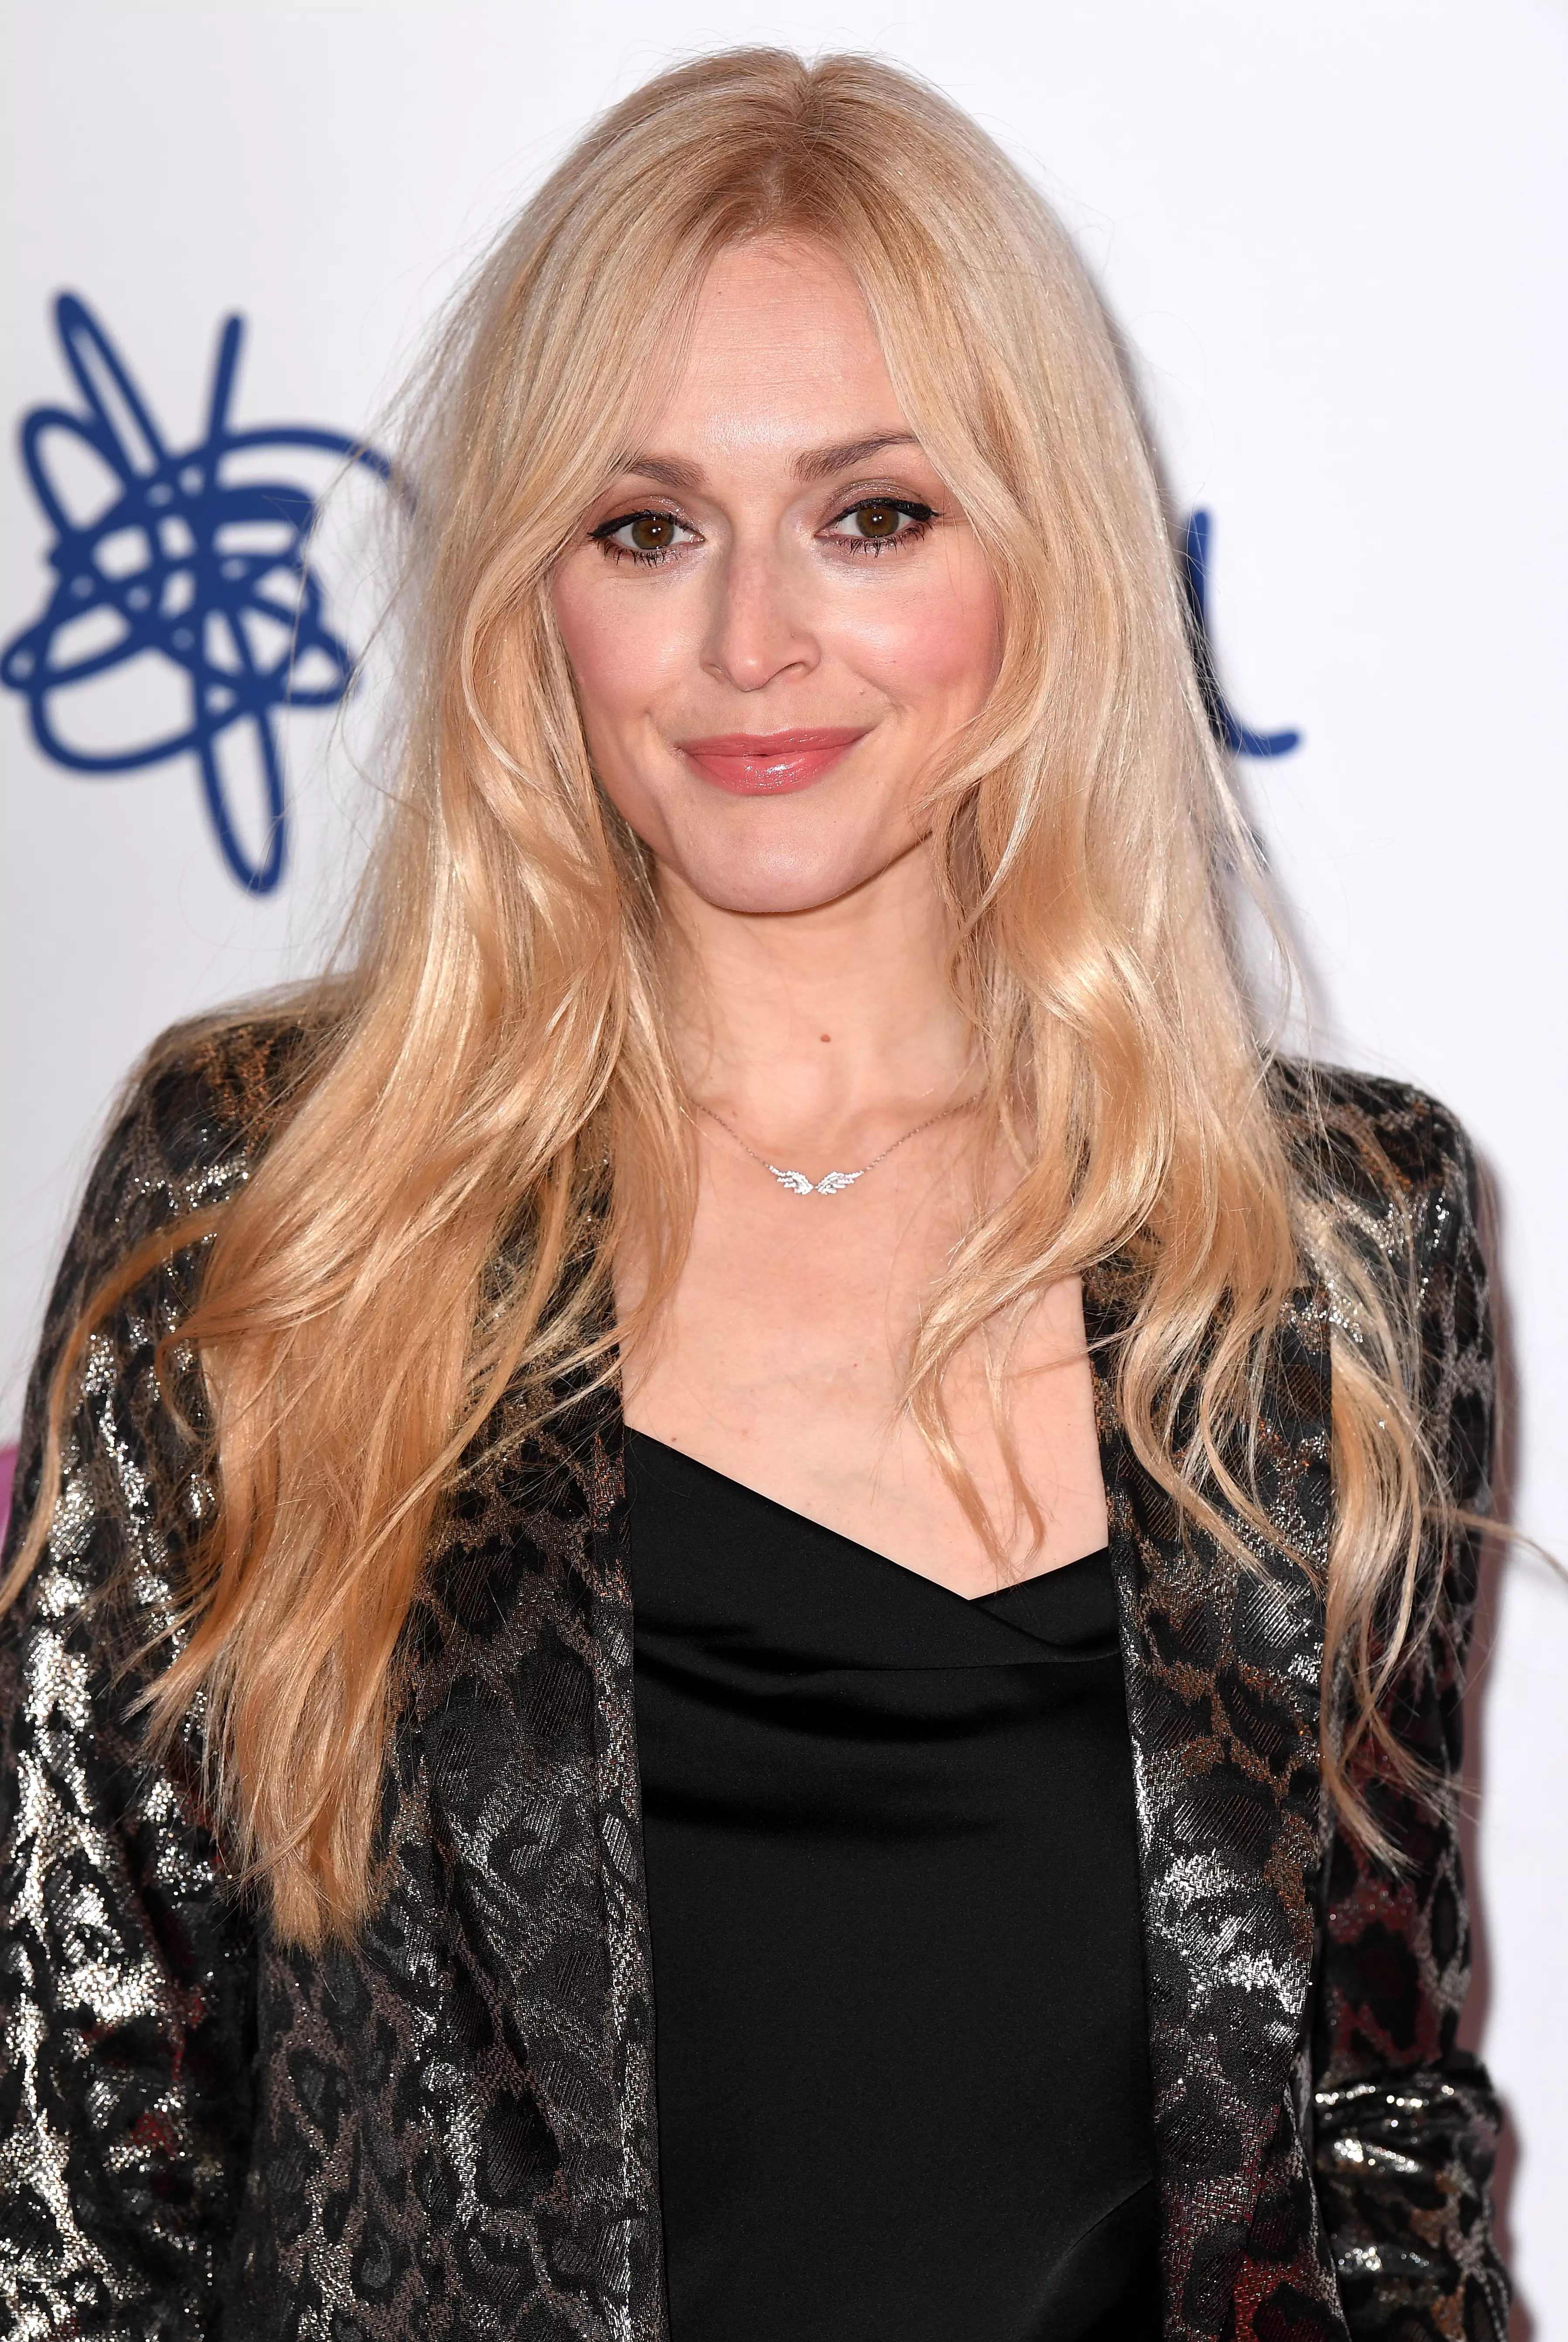 Fearne has been a regular on the comedy panel show for the past 10 years.